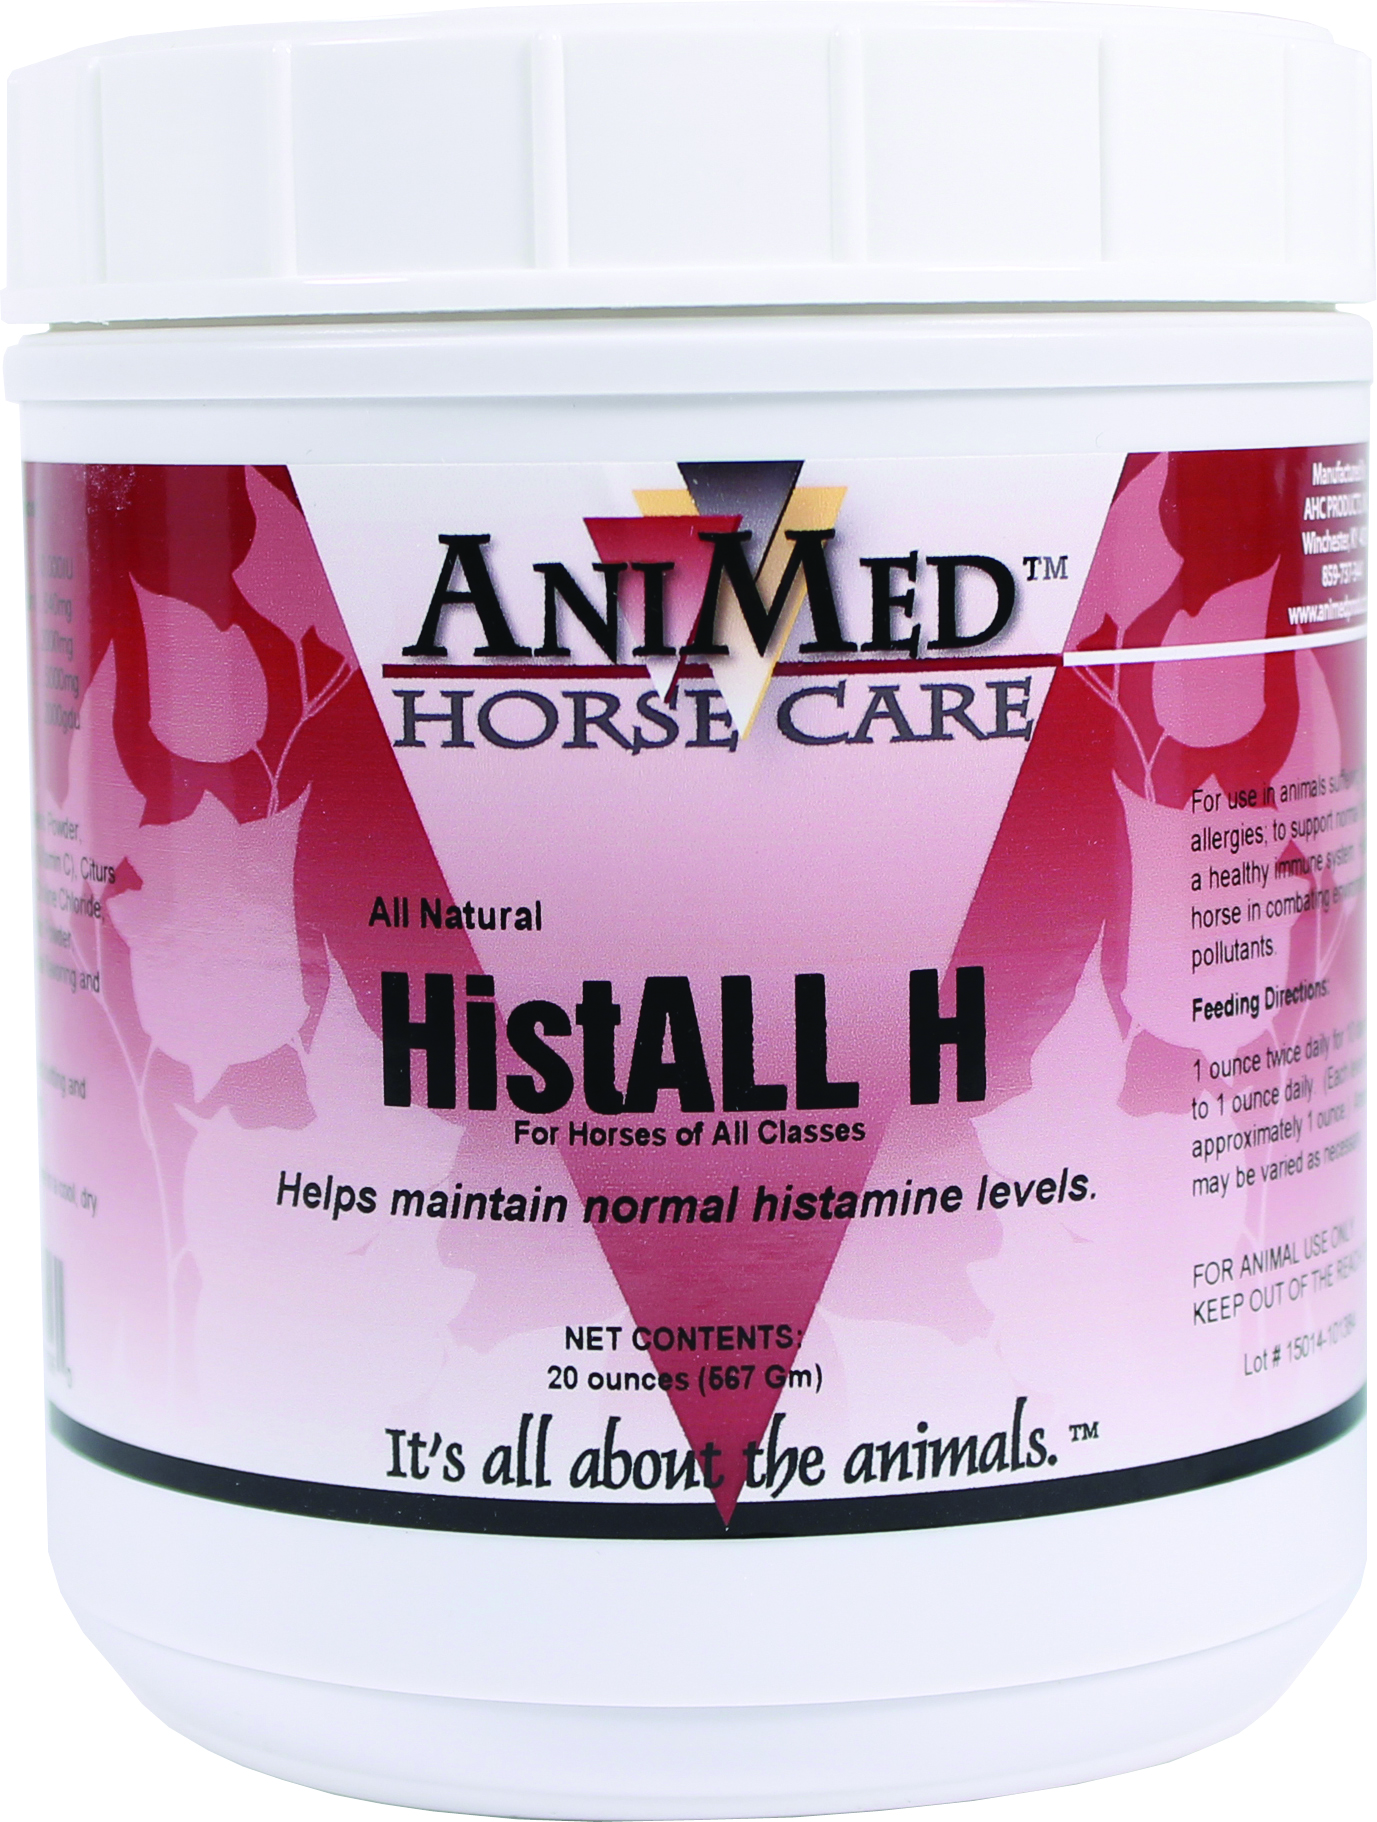 ALL NATUAL HISTALL H ALLERGY AID FOR HORSES